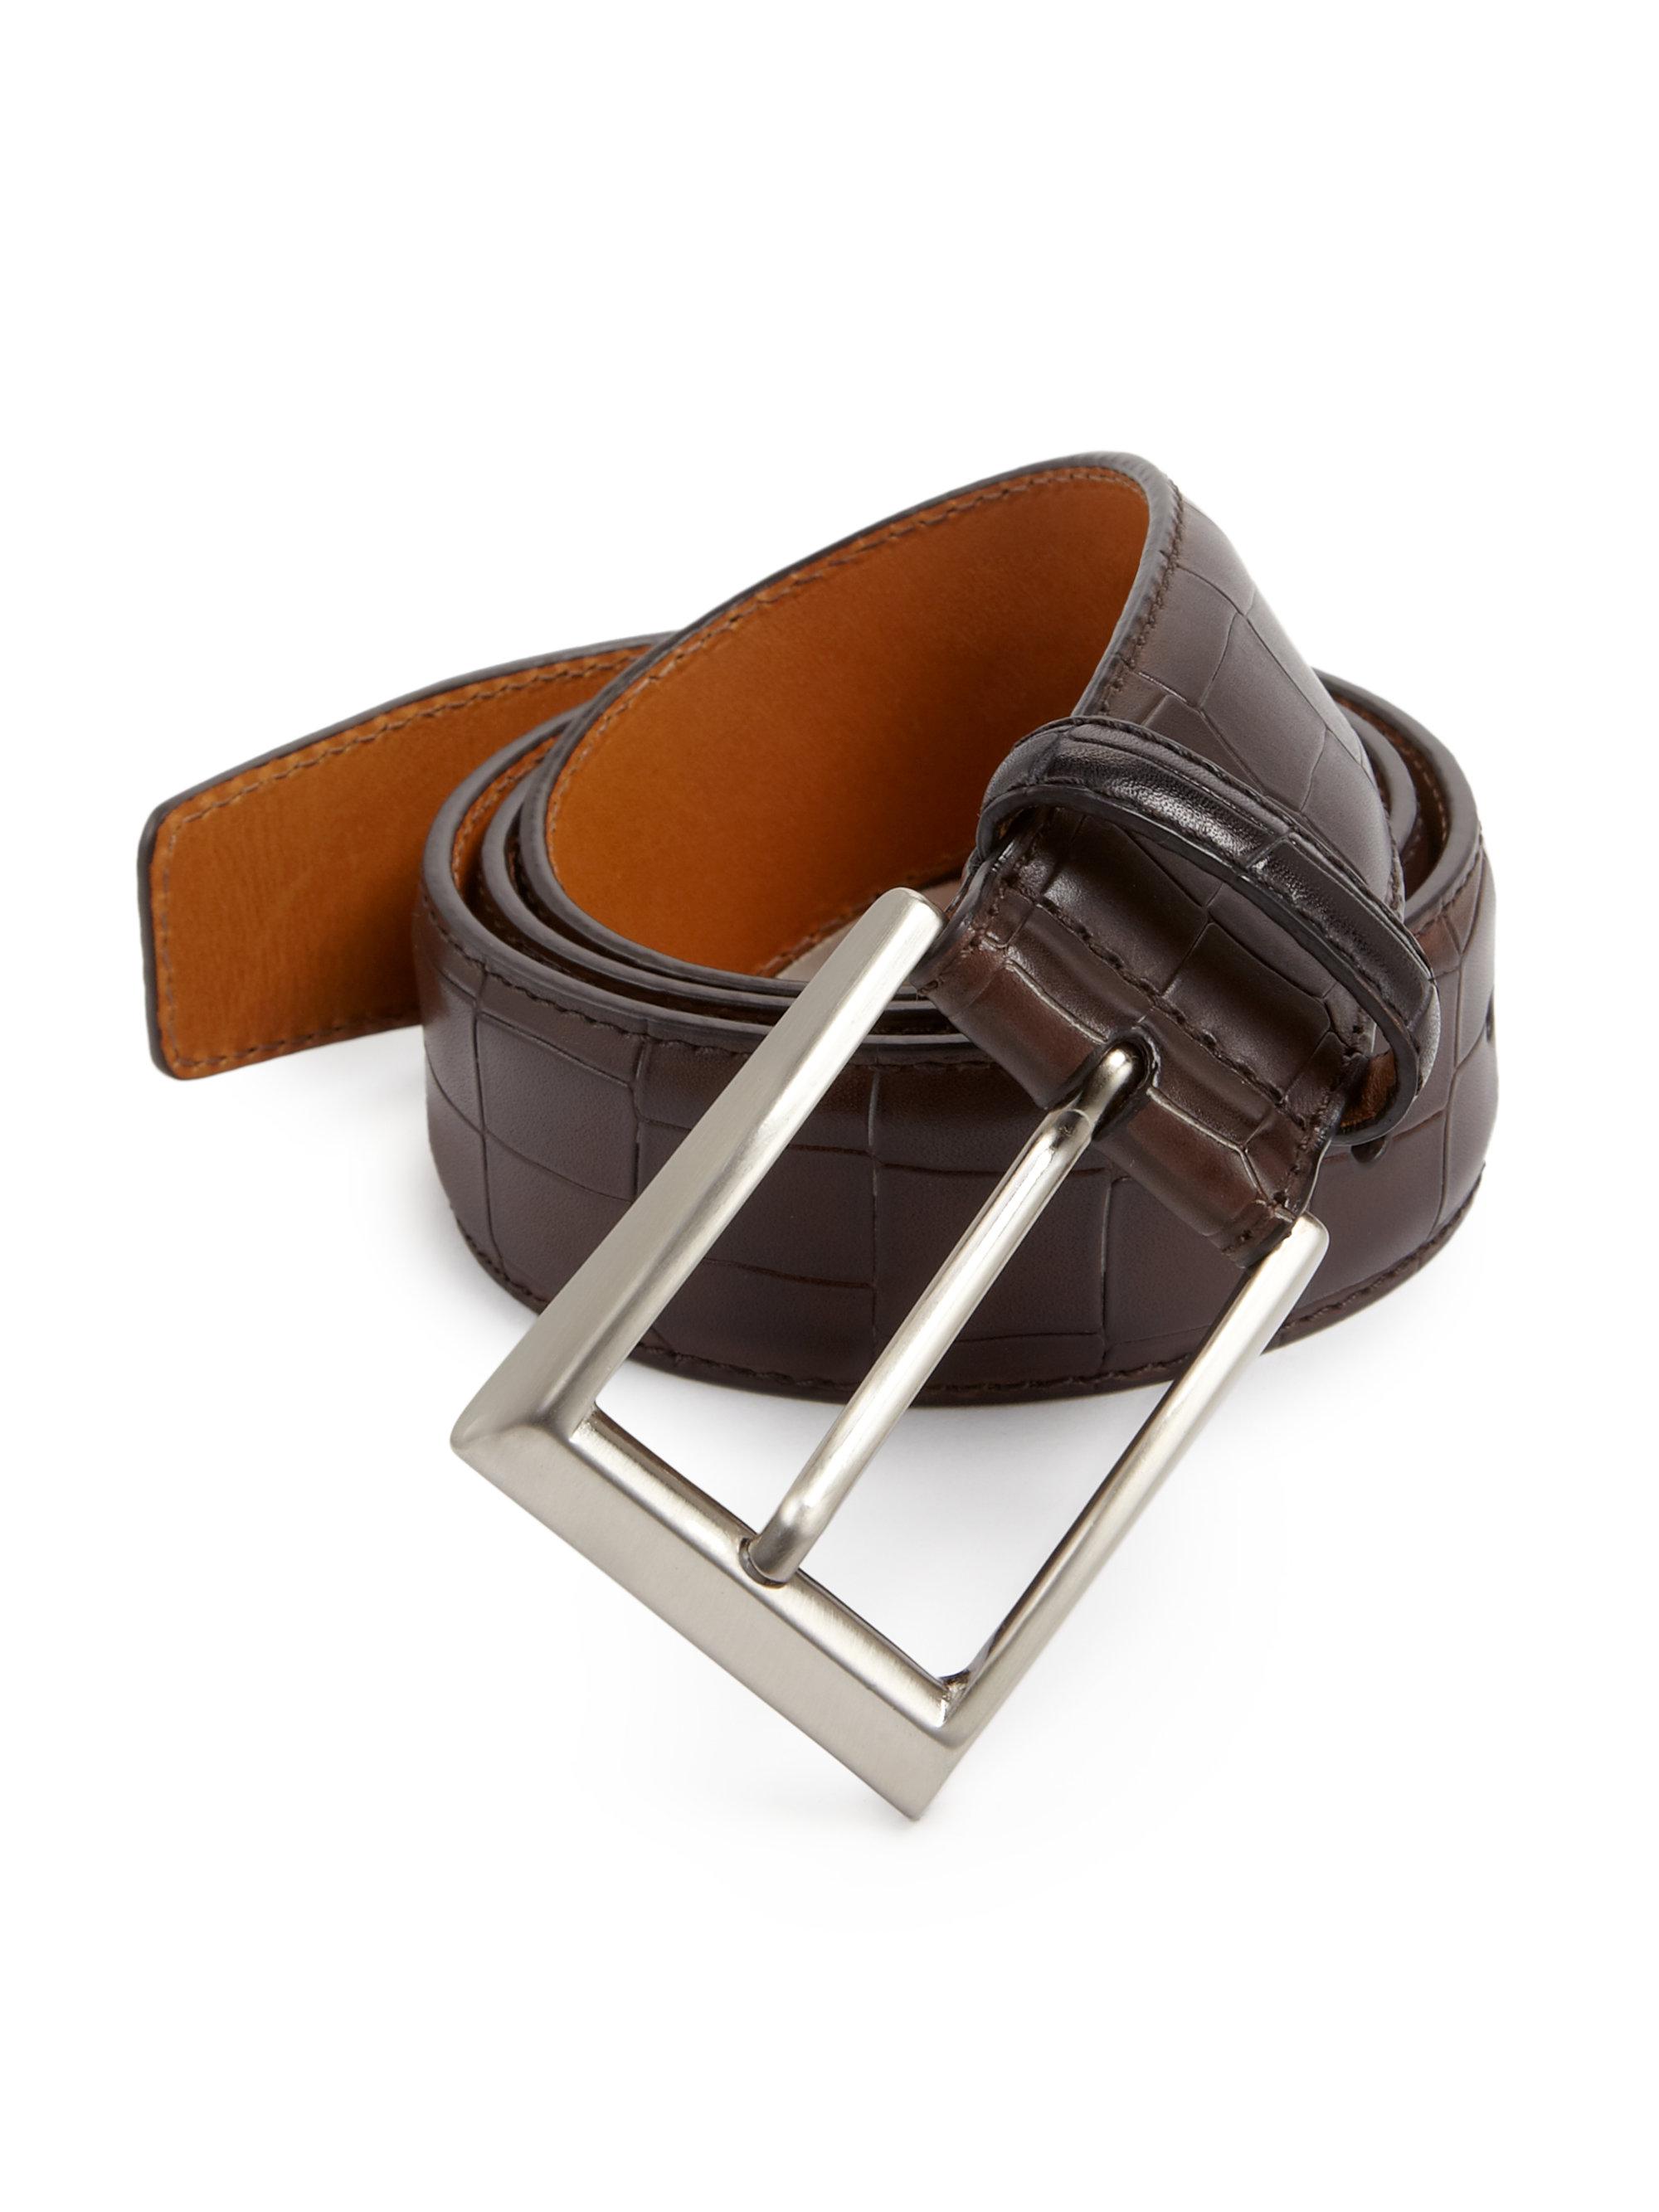 Saks Fifth Avenue Saks Fifth Avenue By Magnanni Croc-embossed Leather Belt in Brown for Men - Lyst